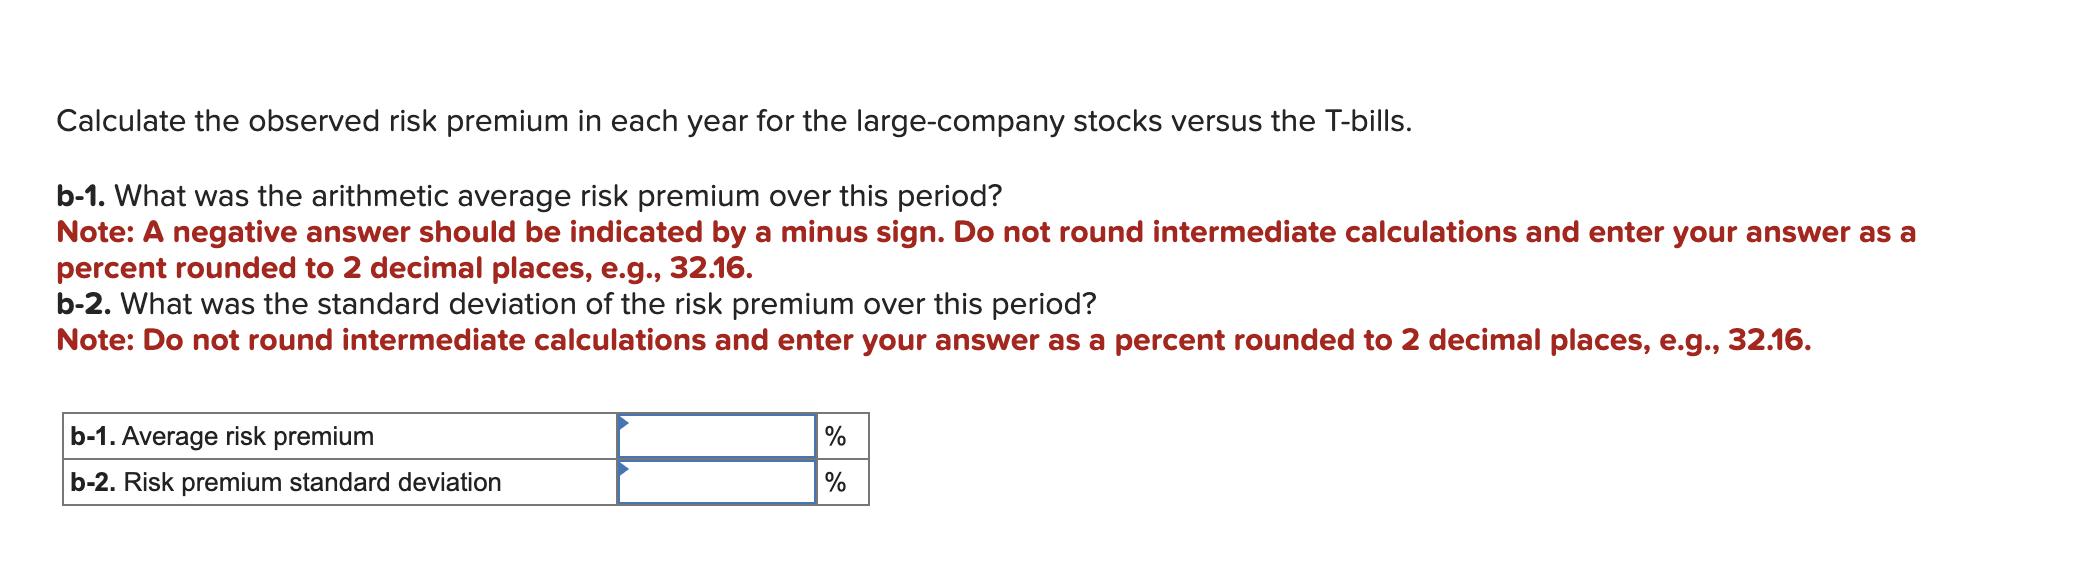 Calculate the observed risk premium in each year for the large-company stocks versus the T-bills. b-1. What was the arithmeti